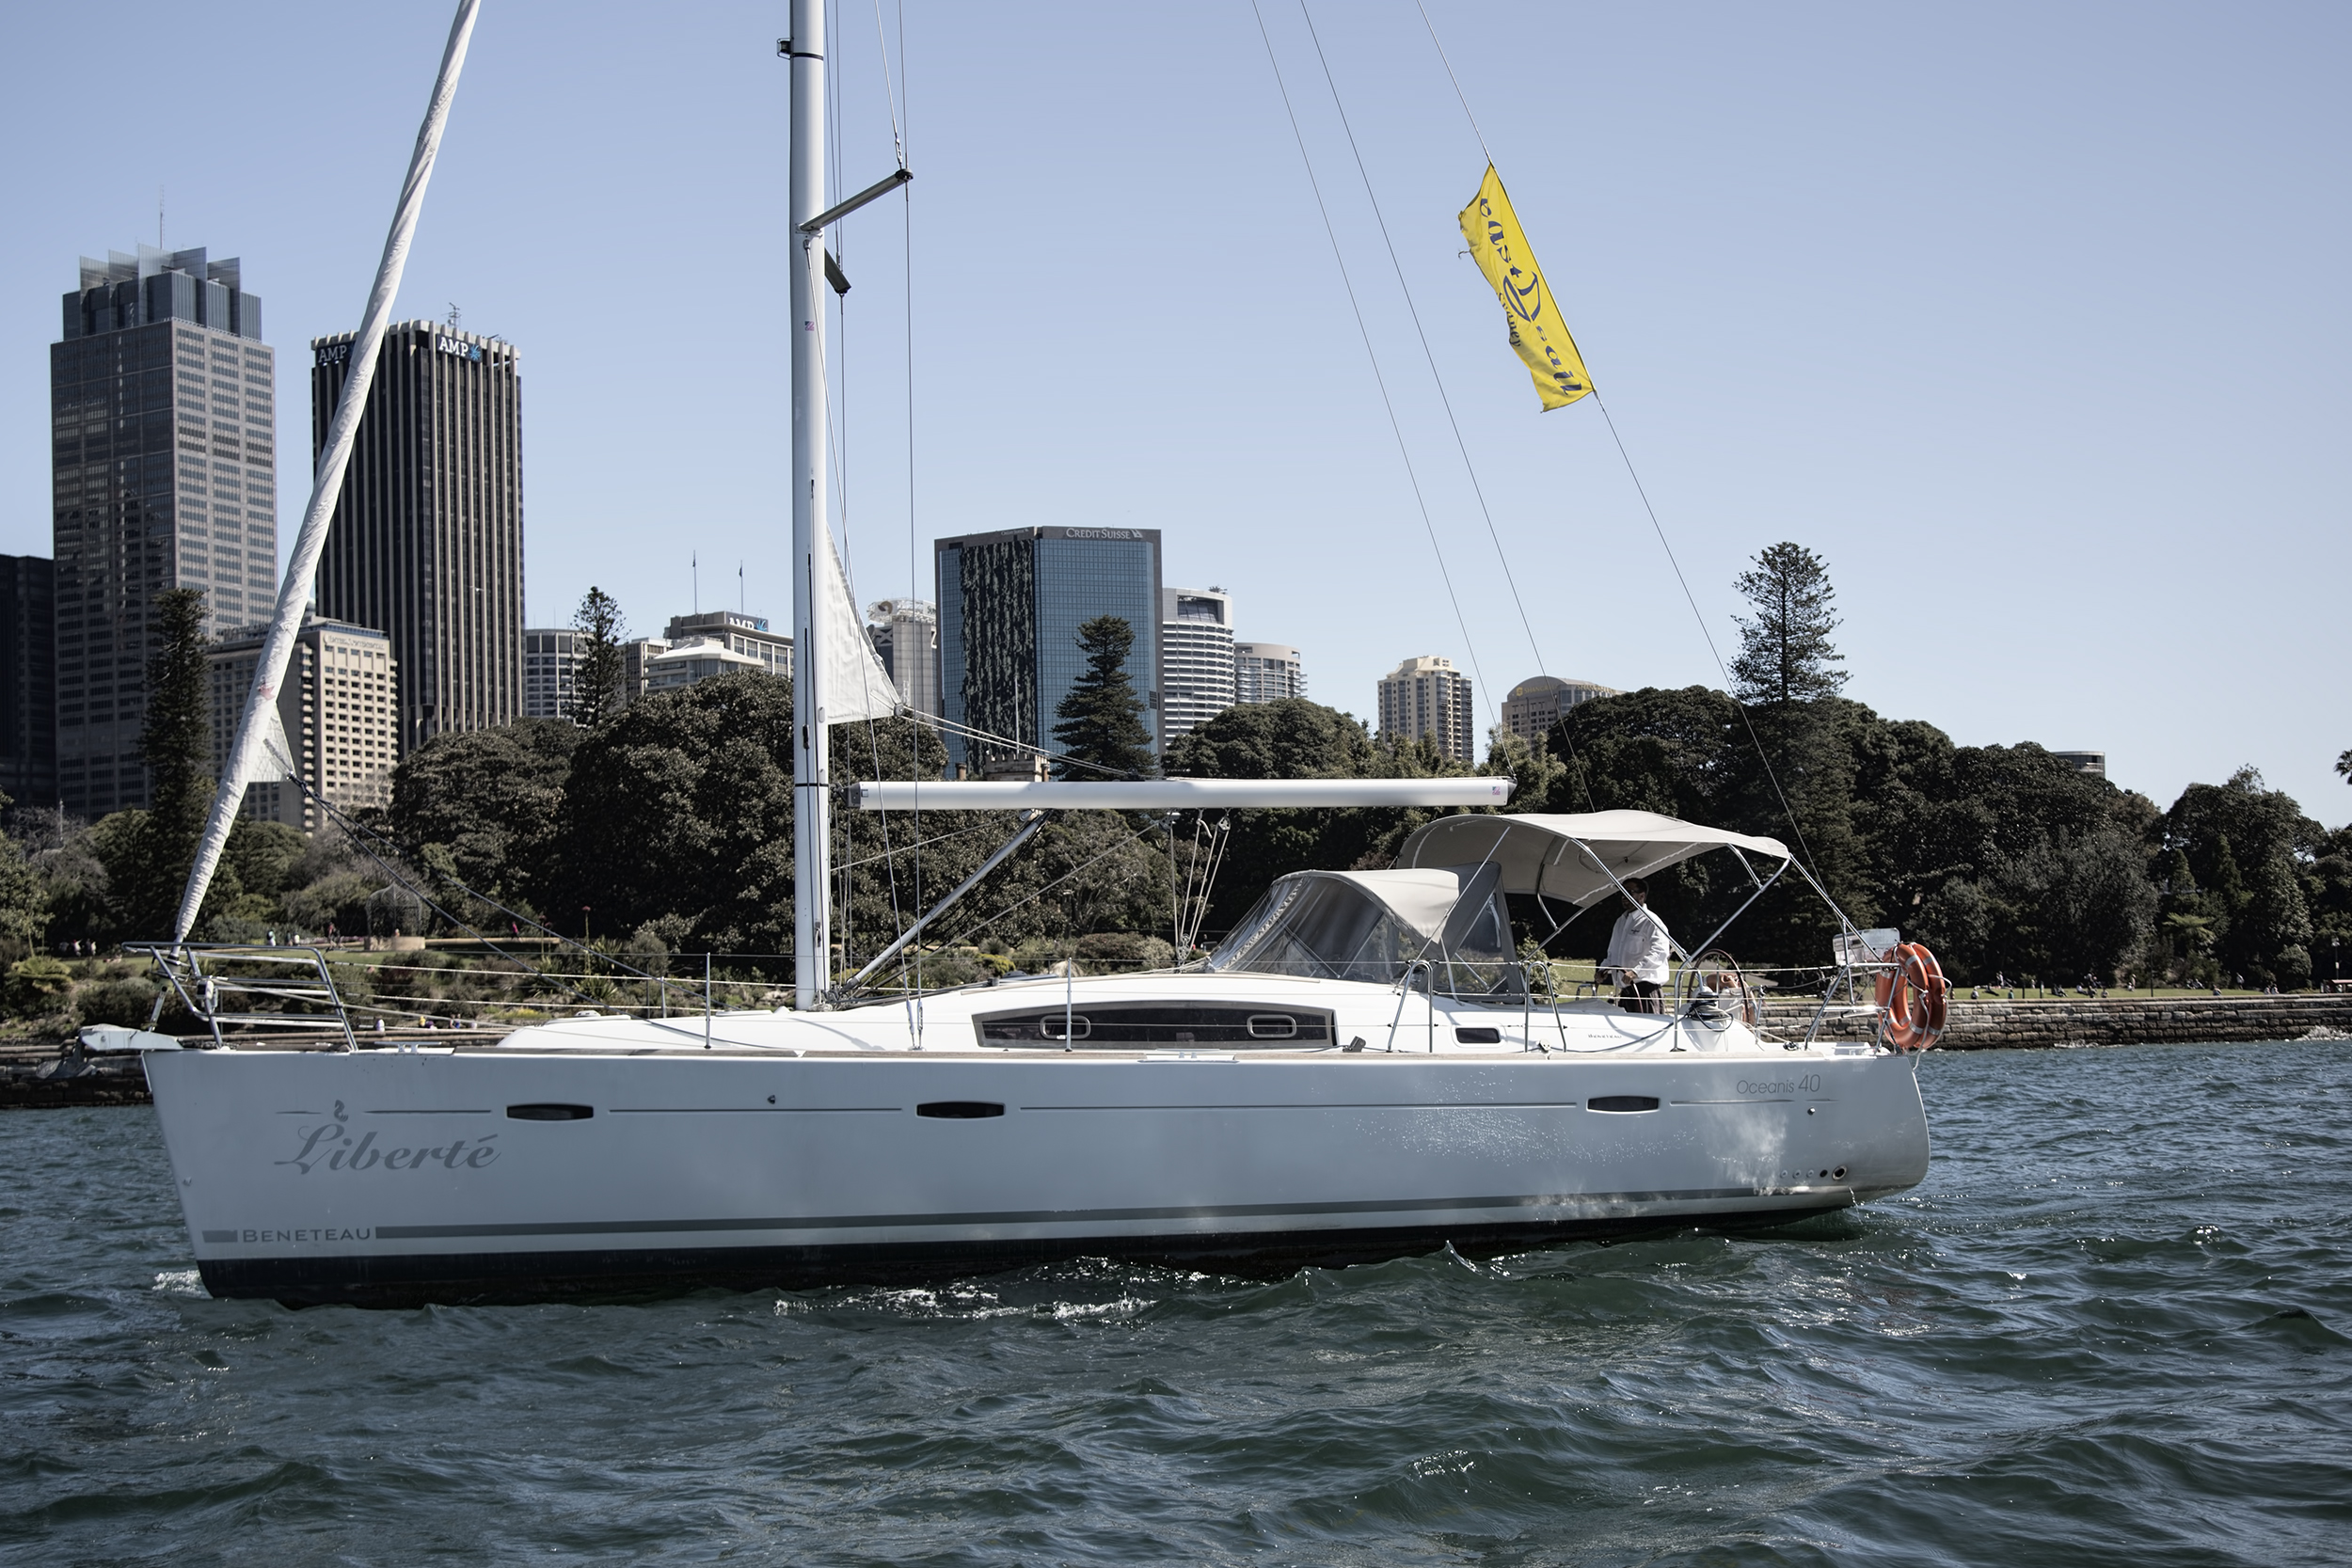 Bareboat Beneteau First 40 or Oceanis 40 for up to 12 persons